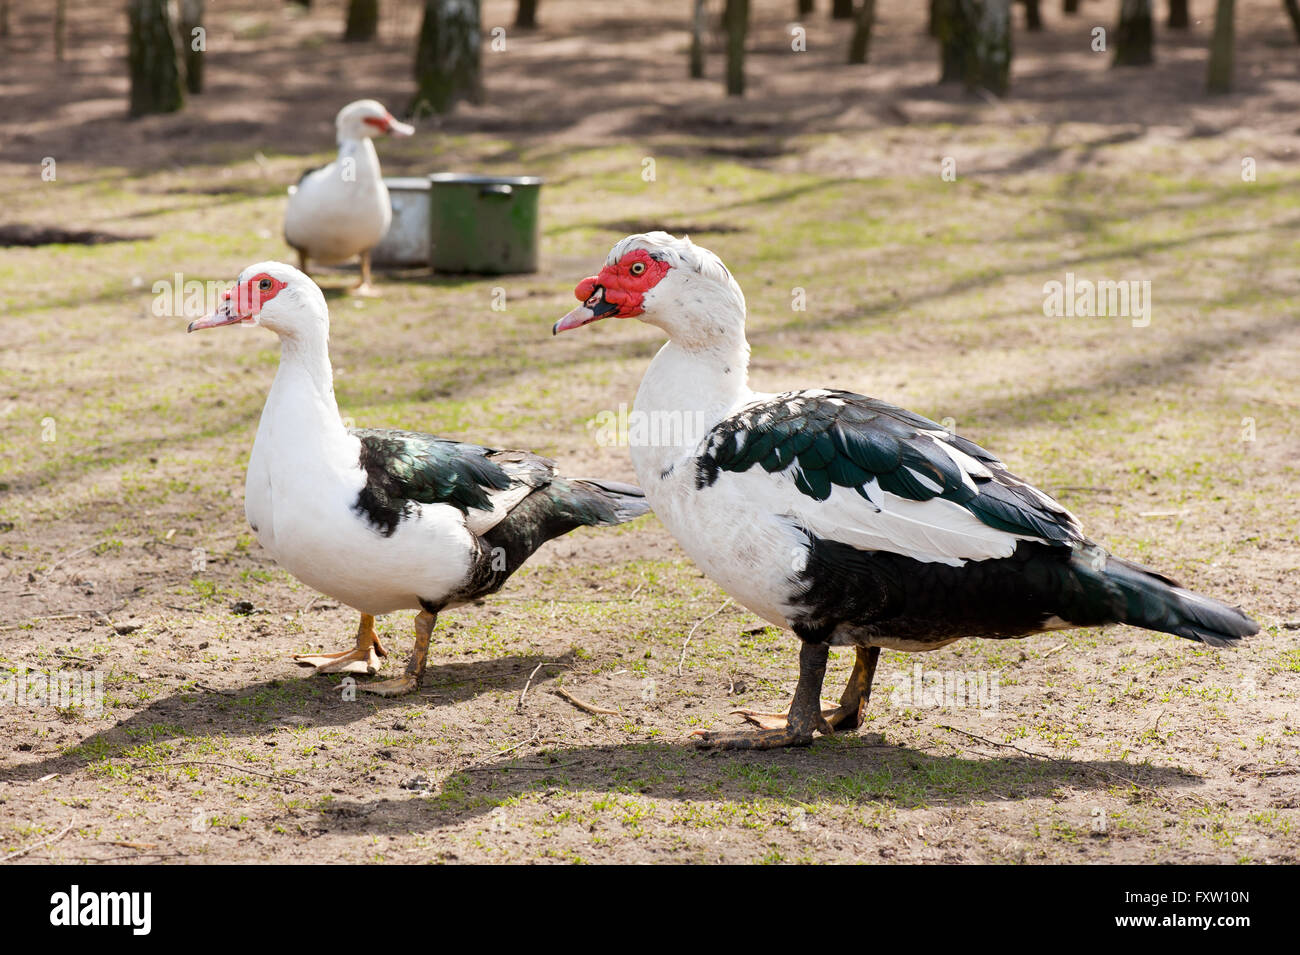 Muscovy Duck birds couple posing in backyard, calm domestic and culinary Cairina moschata birds with white and black plumage. Stock Photo